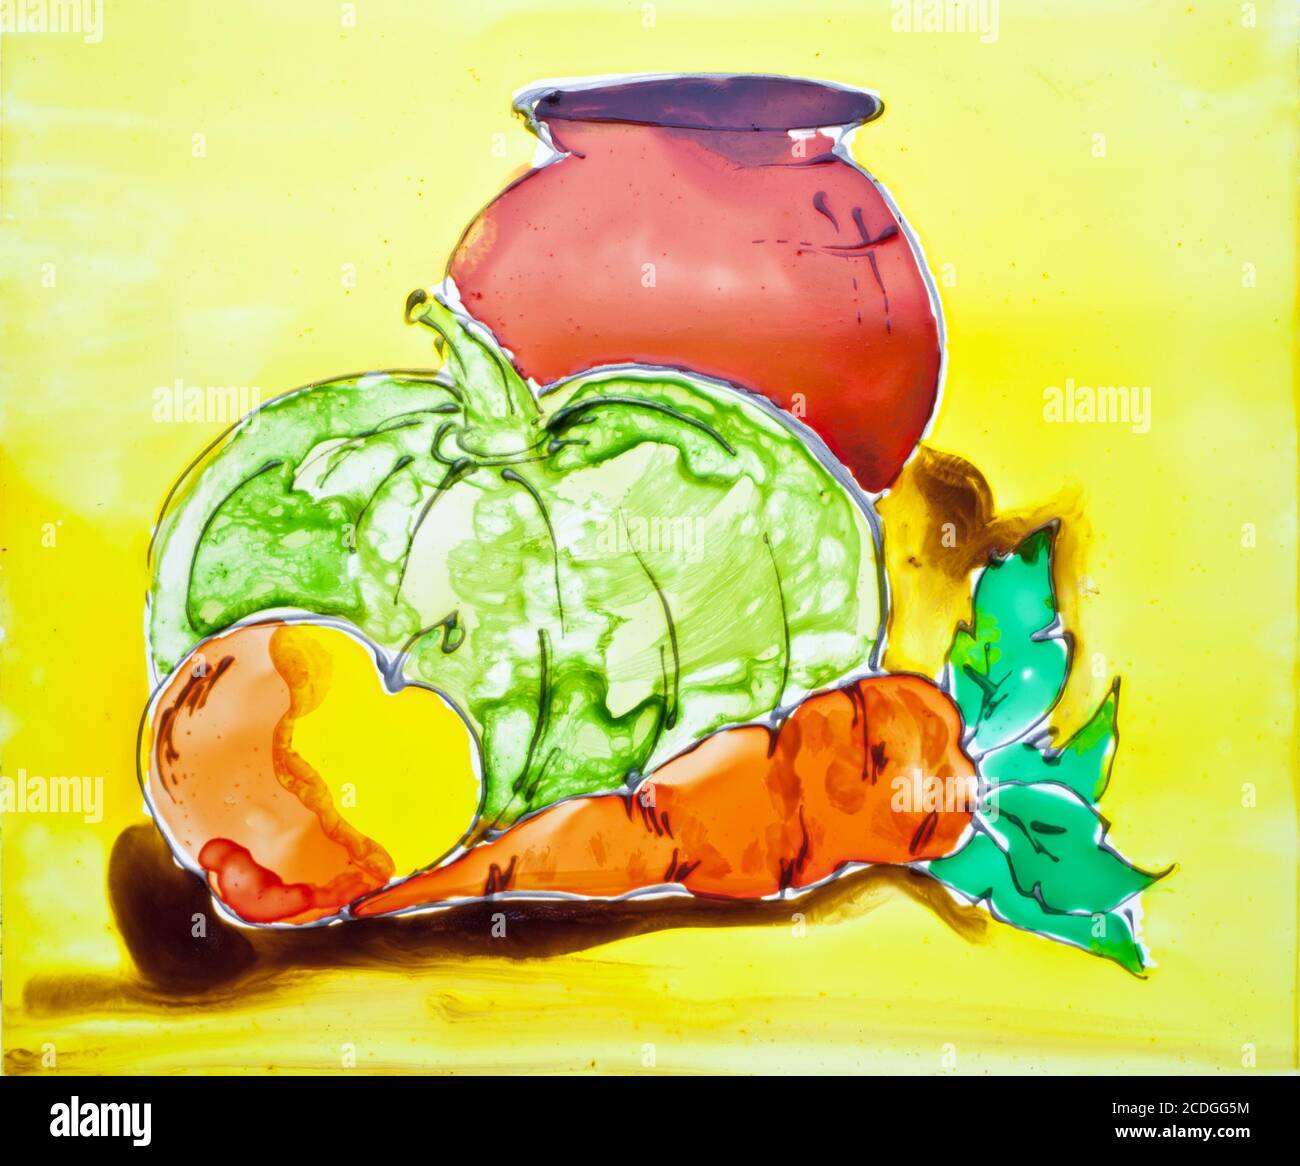 Carrots, pumpkin, apple and jug are drawn on glass by translucent paints Stock Photo